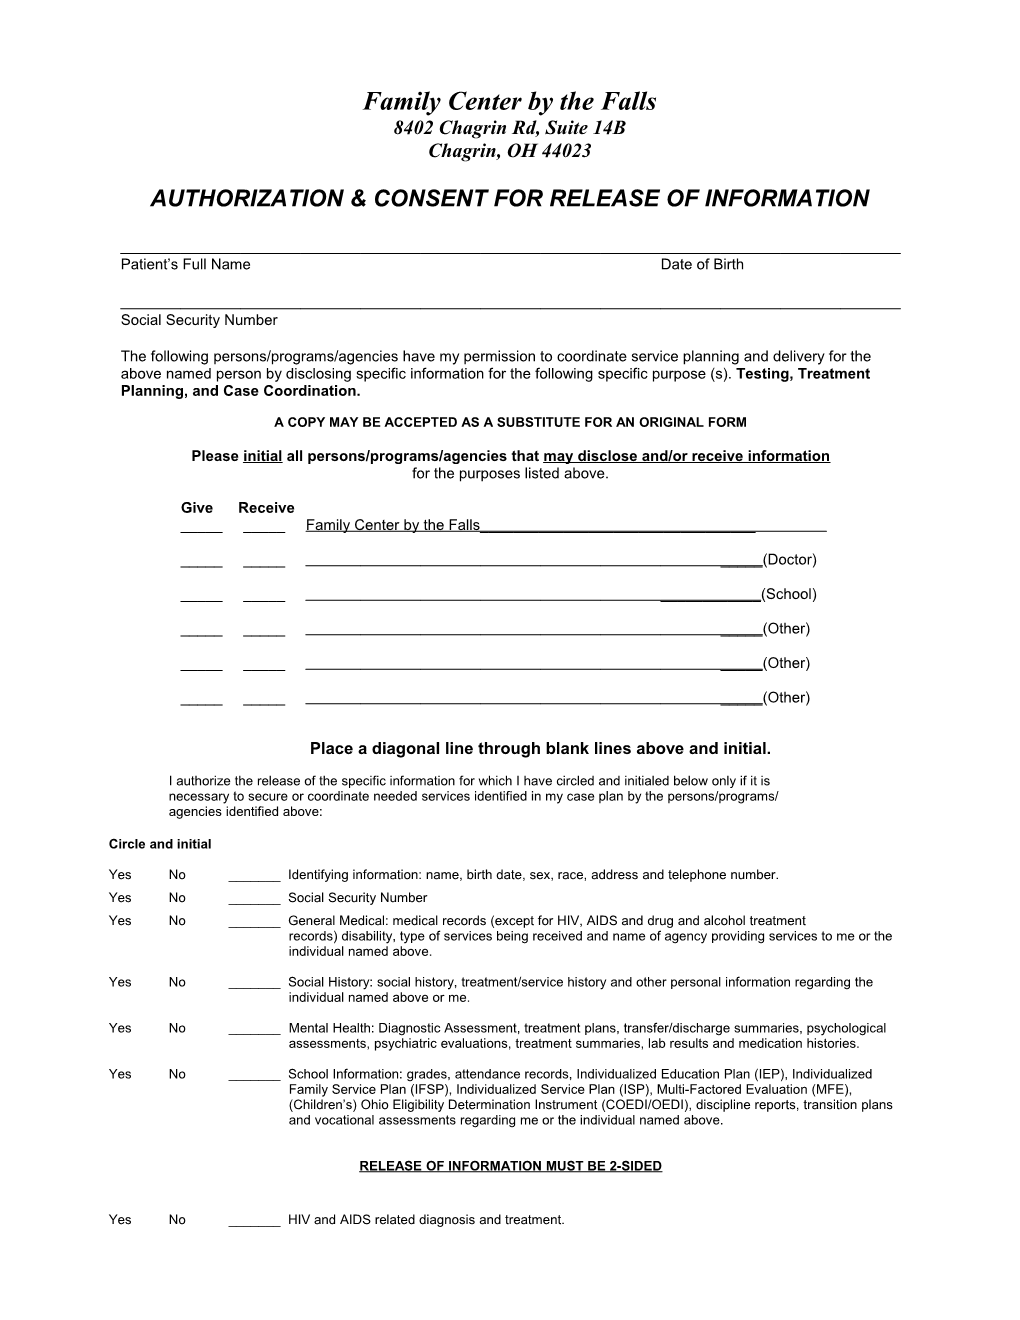 Authorization & Consent for Release of Information